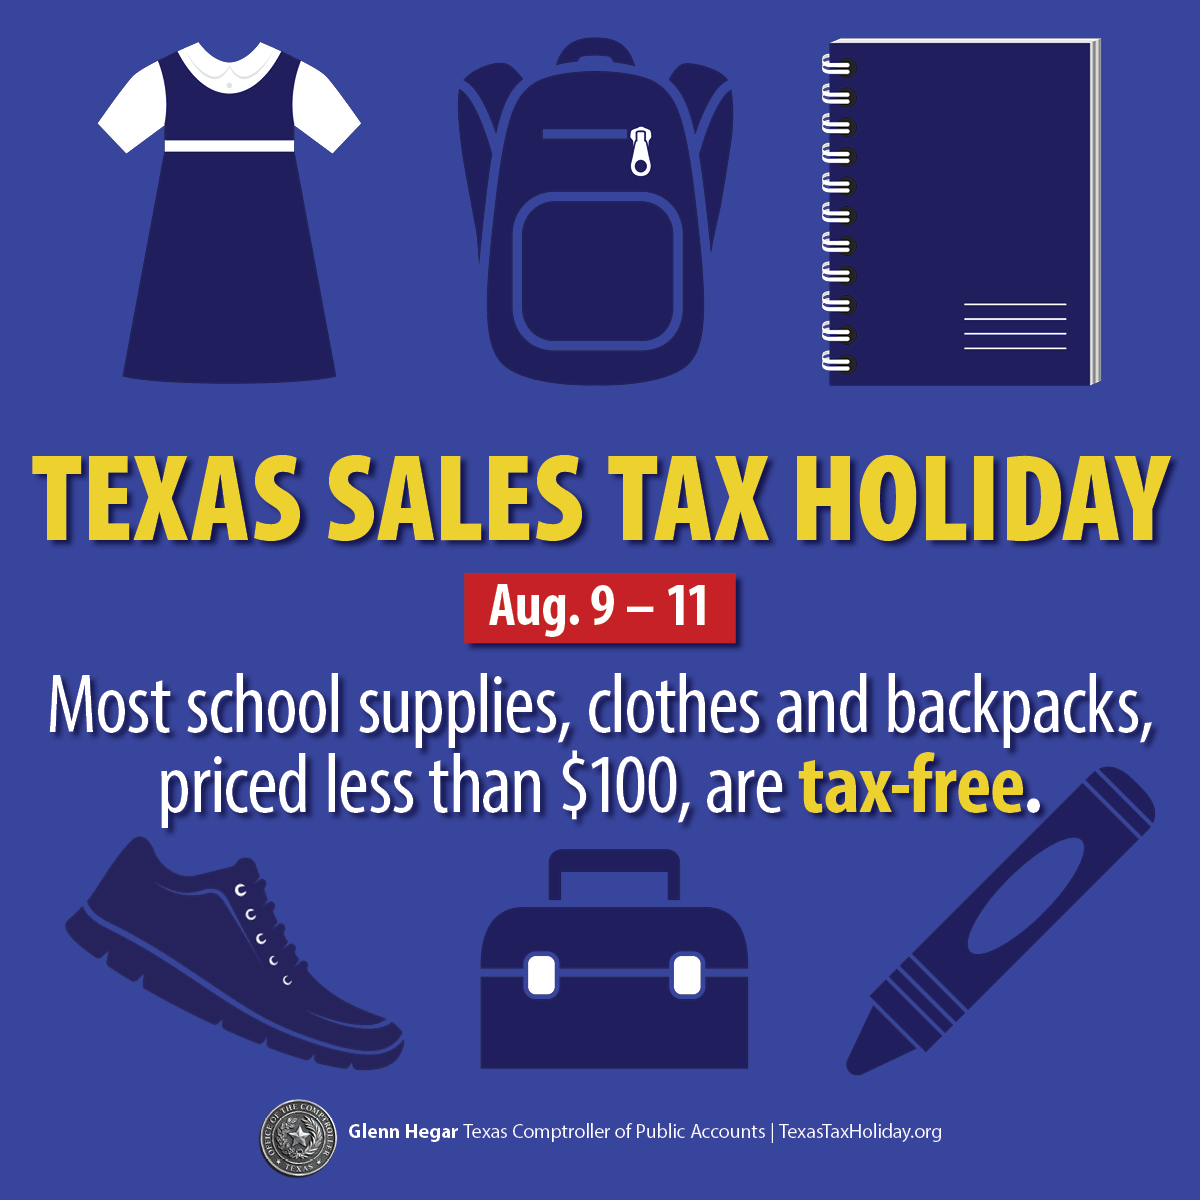 Most school supplies, clothes and backpacks under $100 can be purchased tax-free during Texas’ sales tax holiday.
TexasTaxHoliday.org